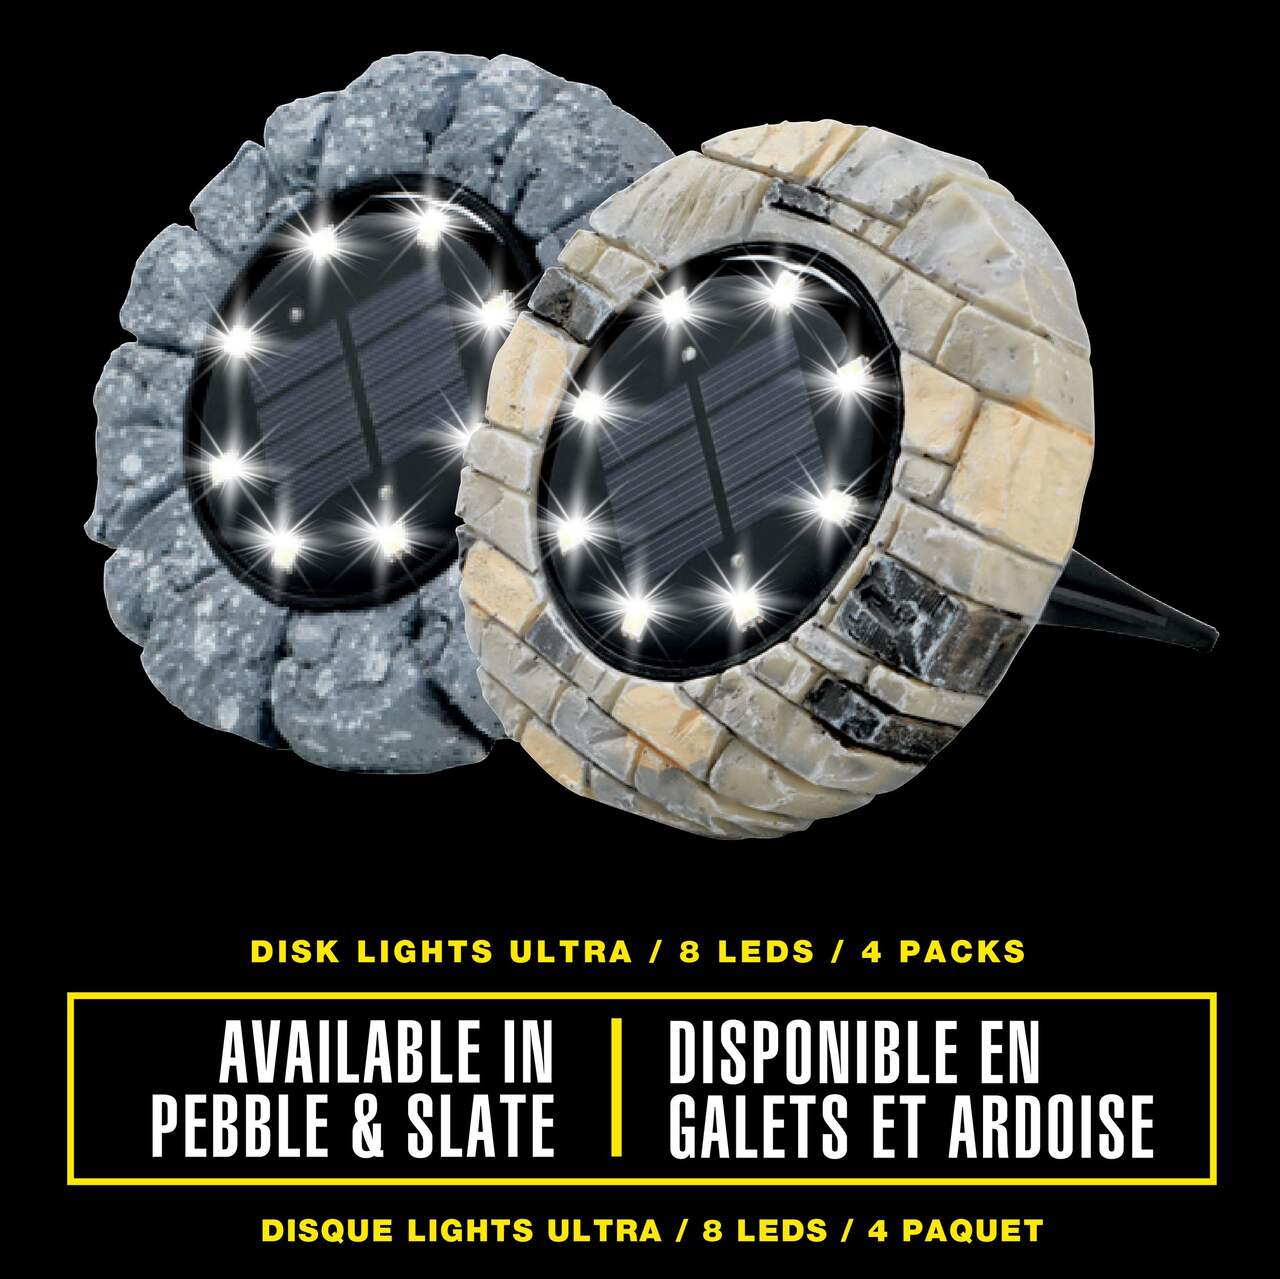 As Seen On TV Bell & Howell Outdoor Solar Disk Lights, Pebble